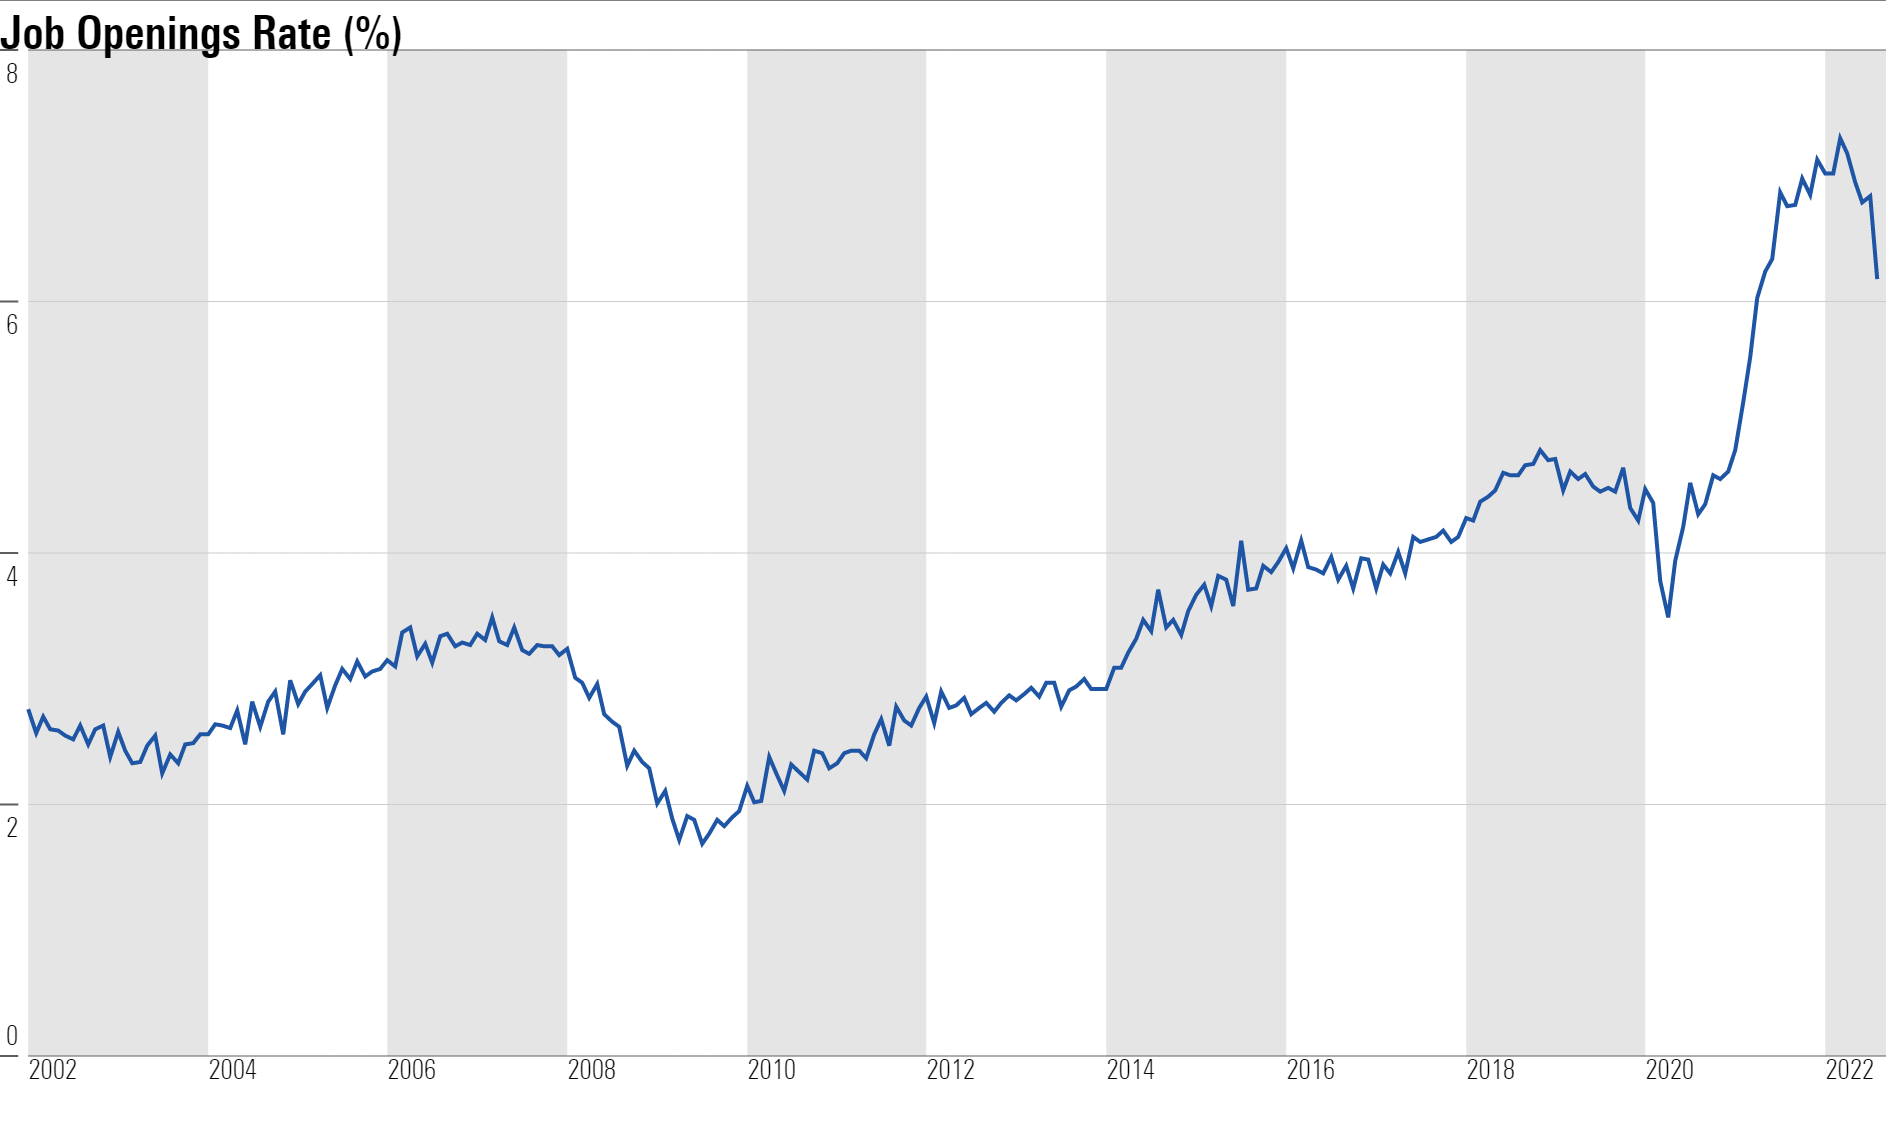 Line chart showing U.S. job openings rate